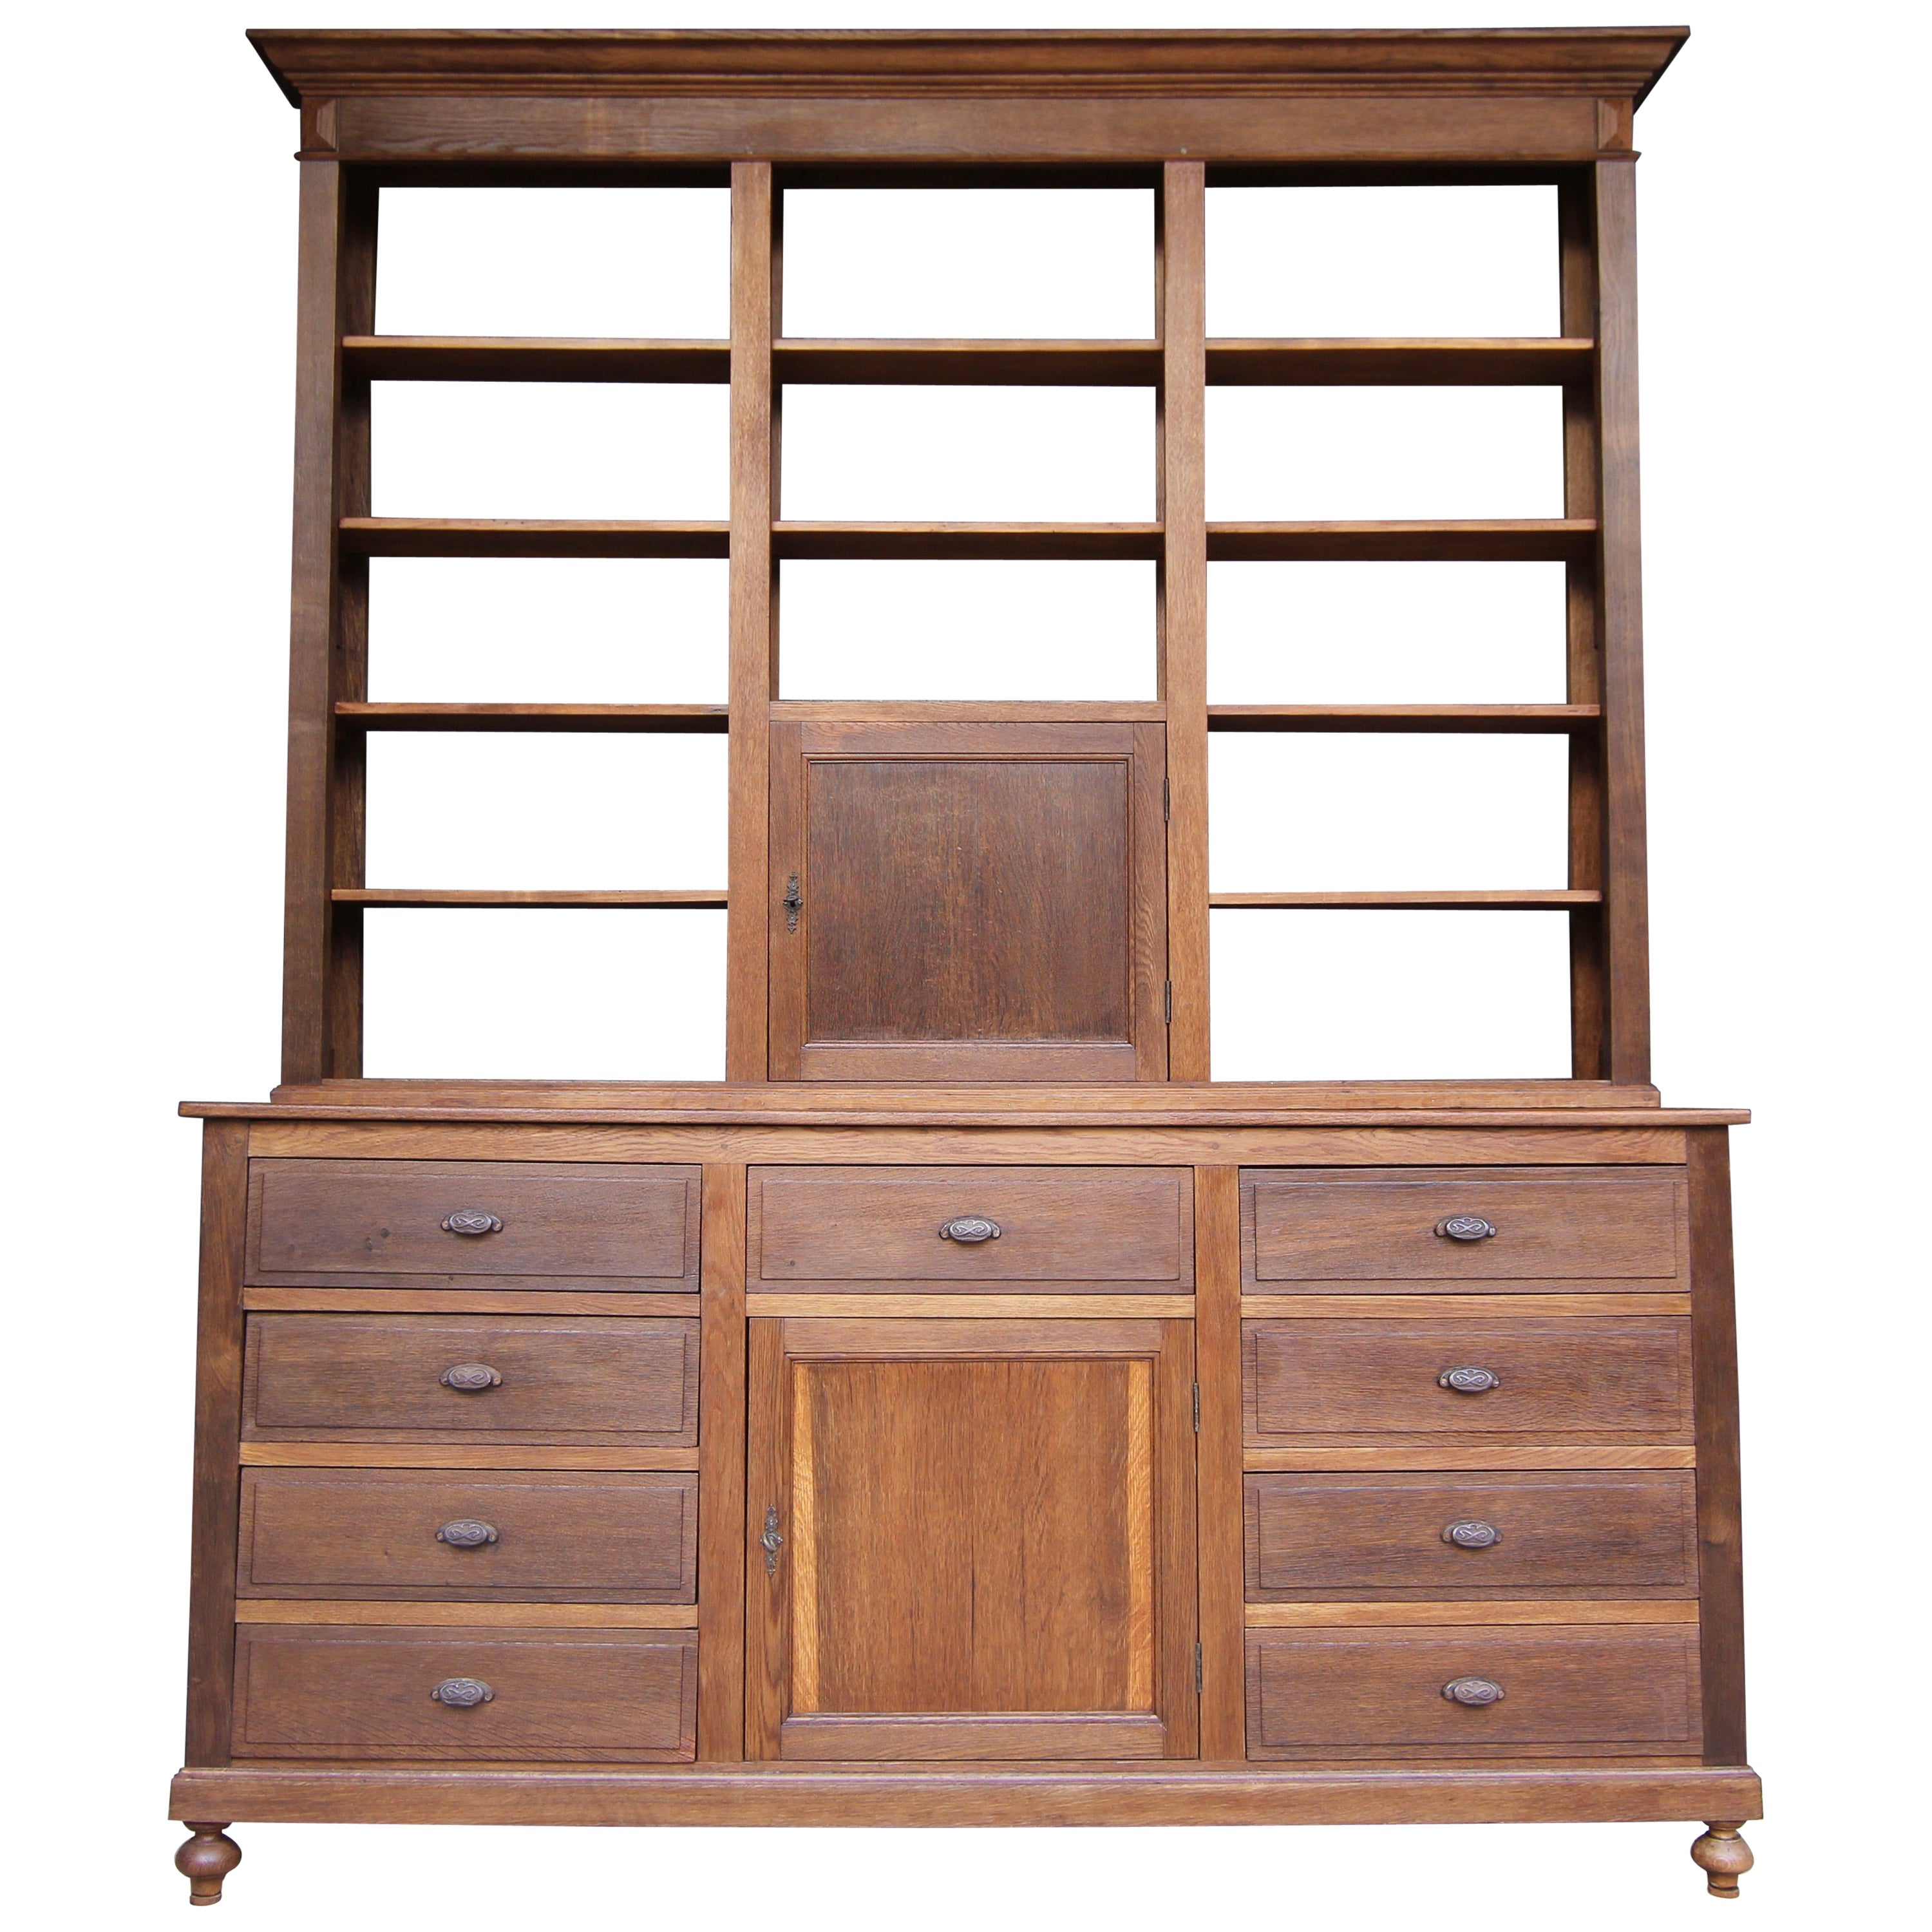 Late 19th Century Apothecary Shop Cabinet For Sale